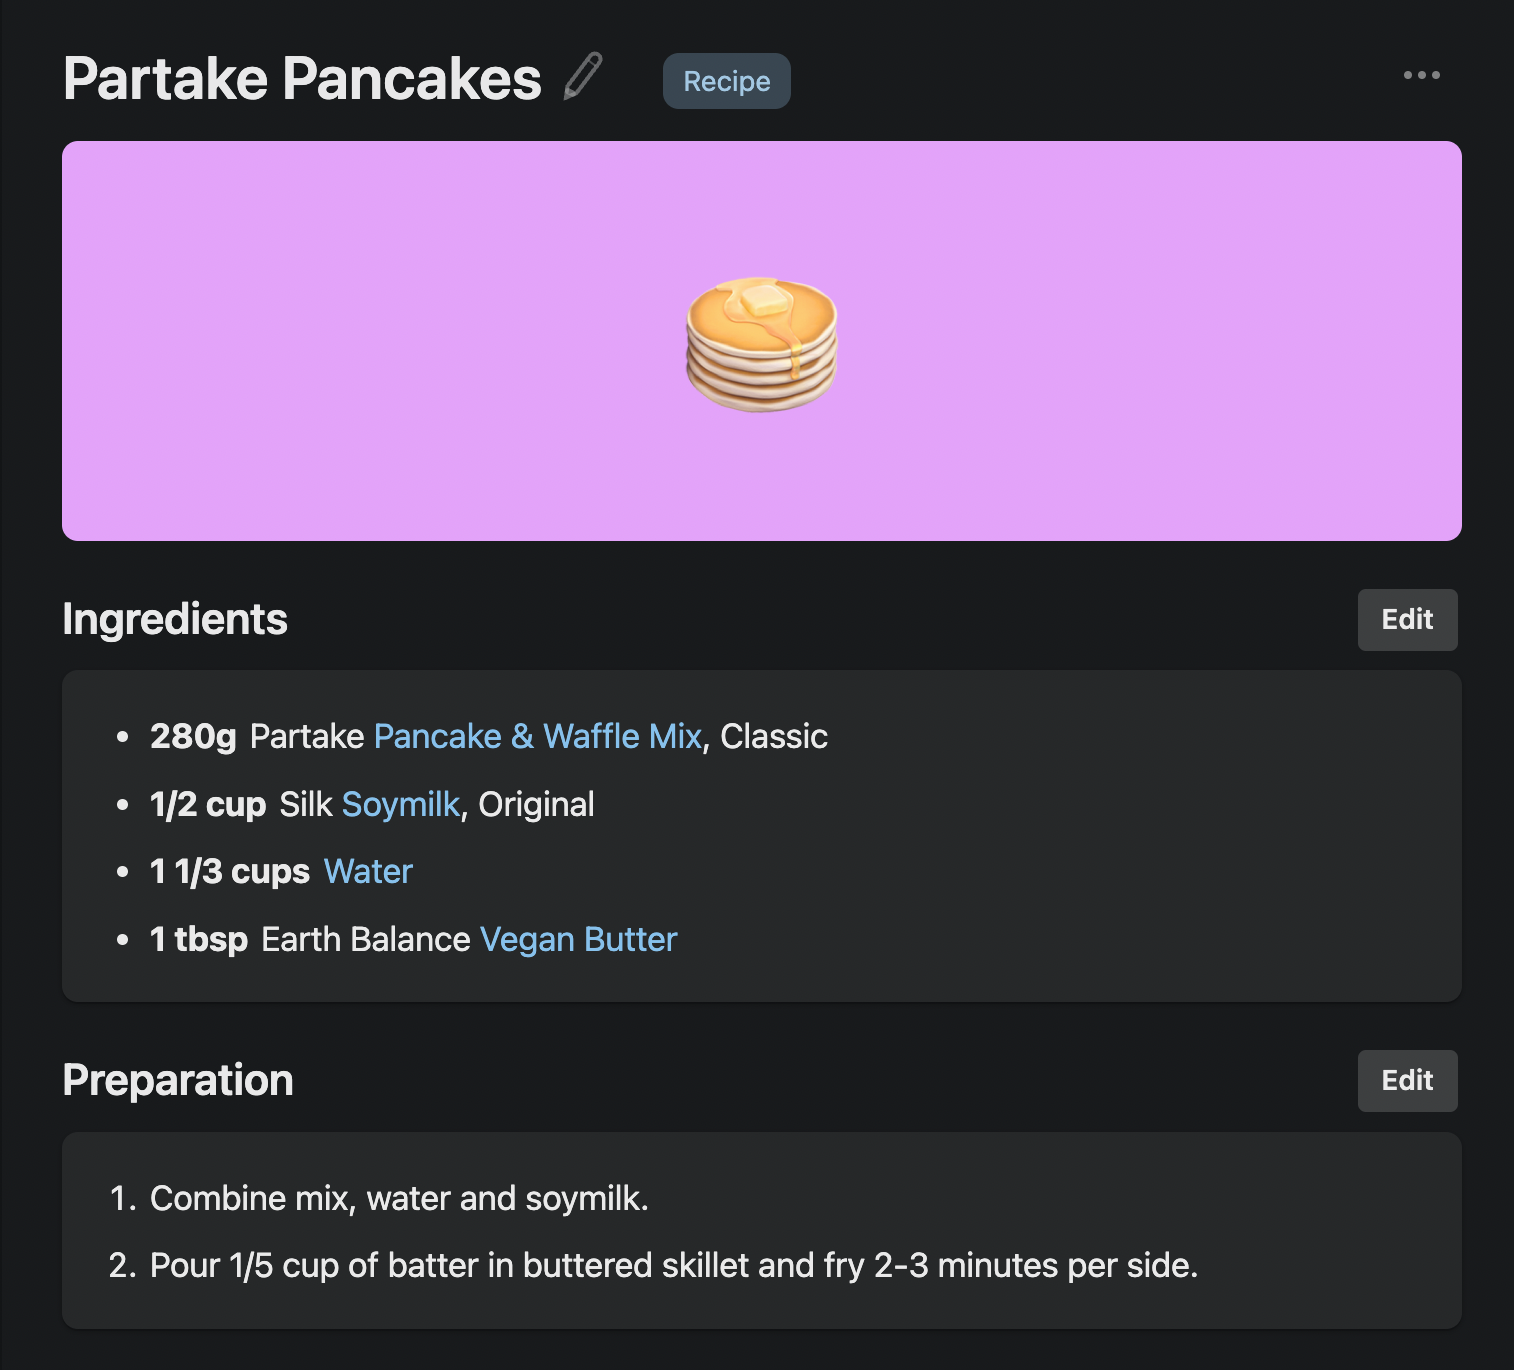 A Screenshot of the Recipe Page